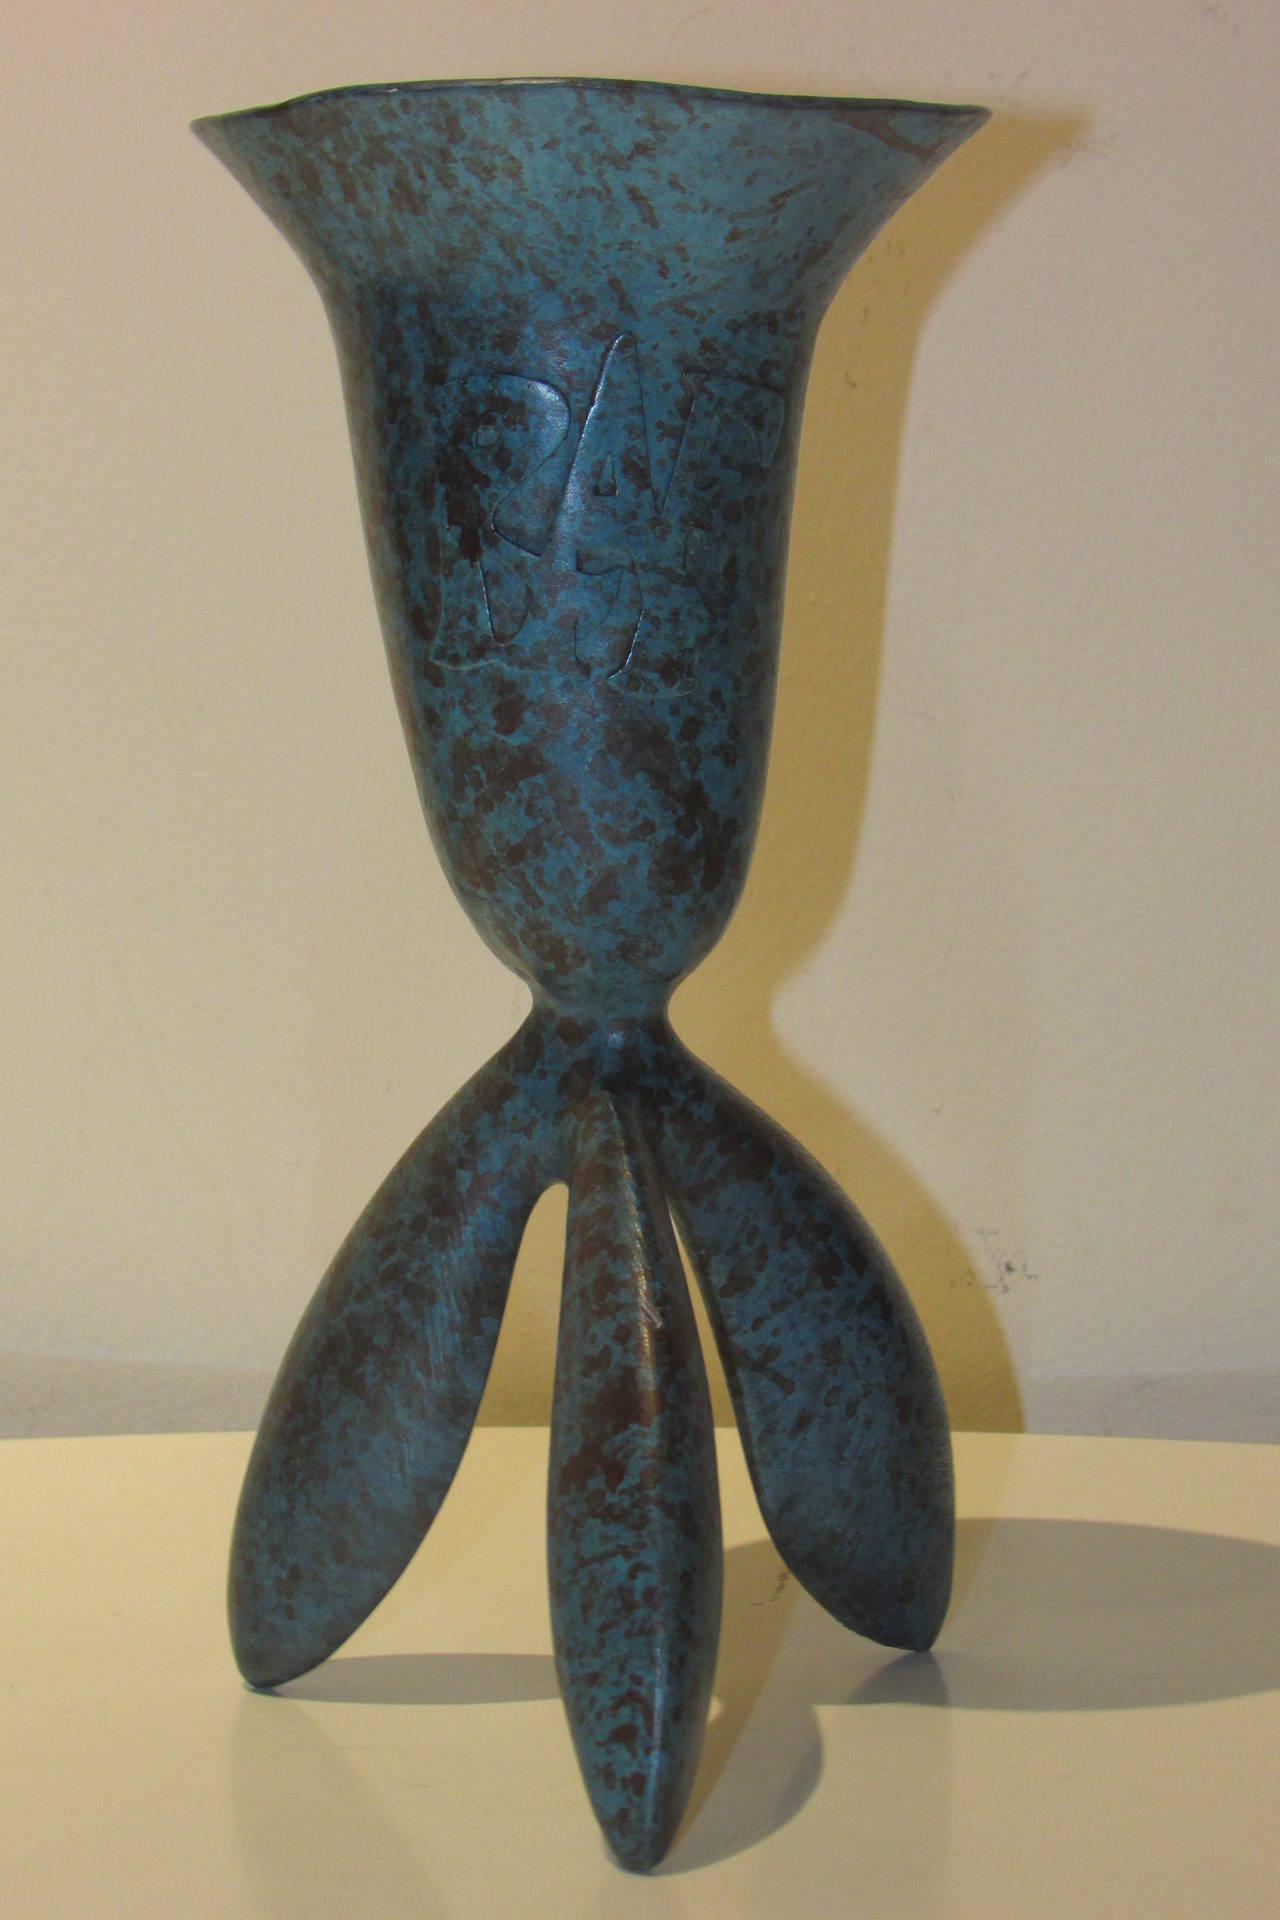 An original turquoise speckled verdigris patinated bronze presentation vessel by Wendell Castle - signed W.C. 94' - with raised letters RAF on one side of trumpet shaped upper body of vase.